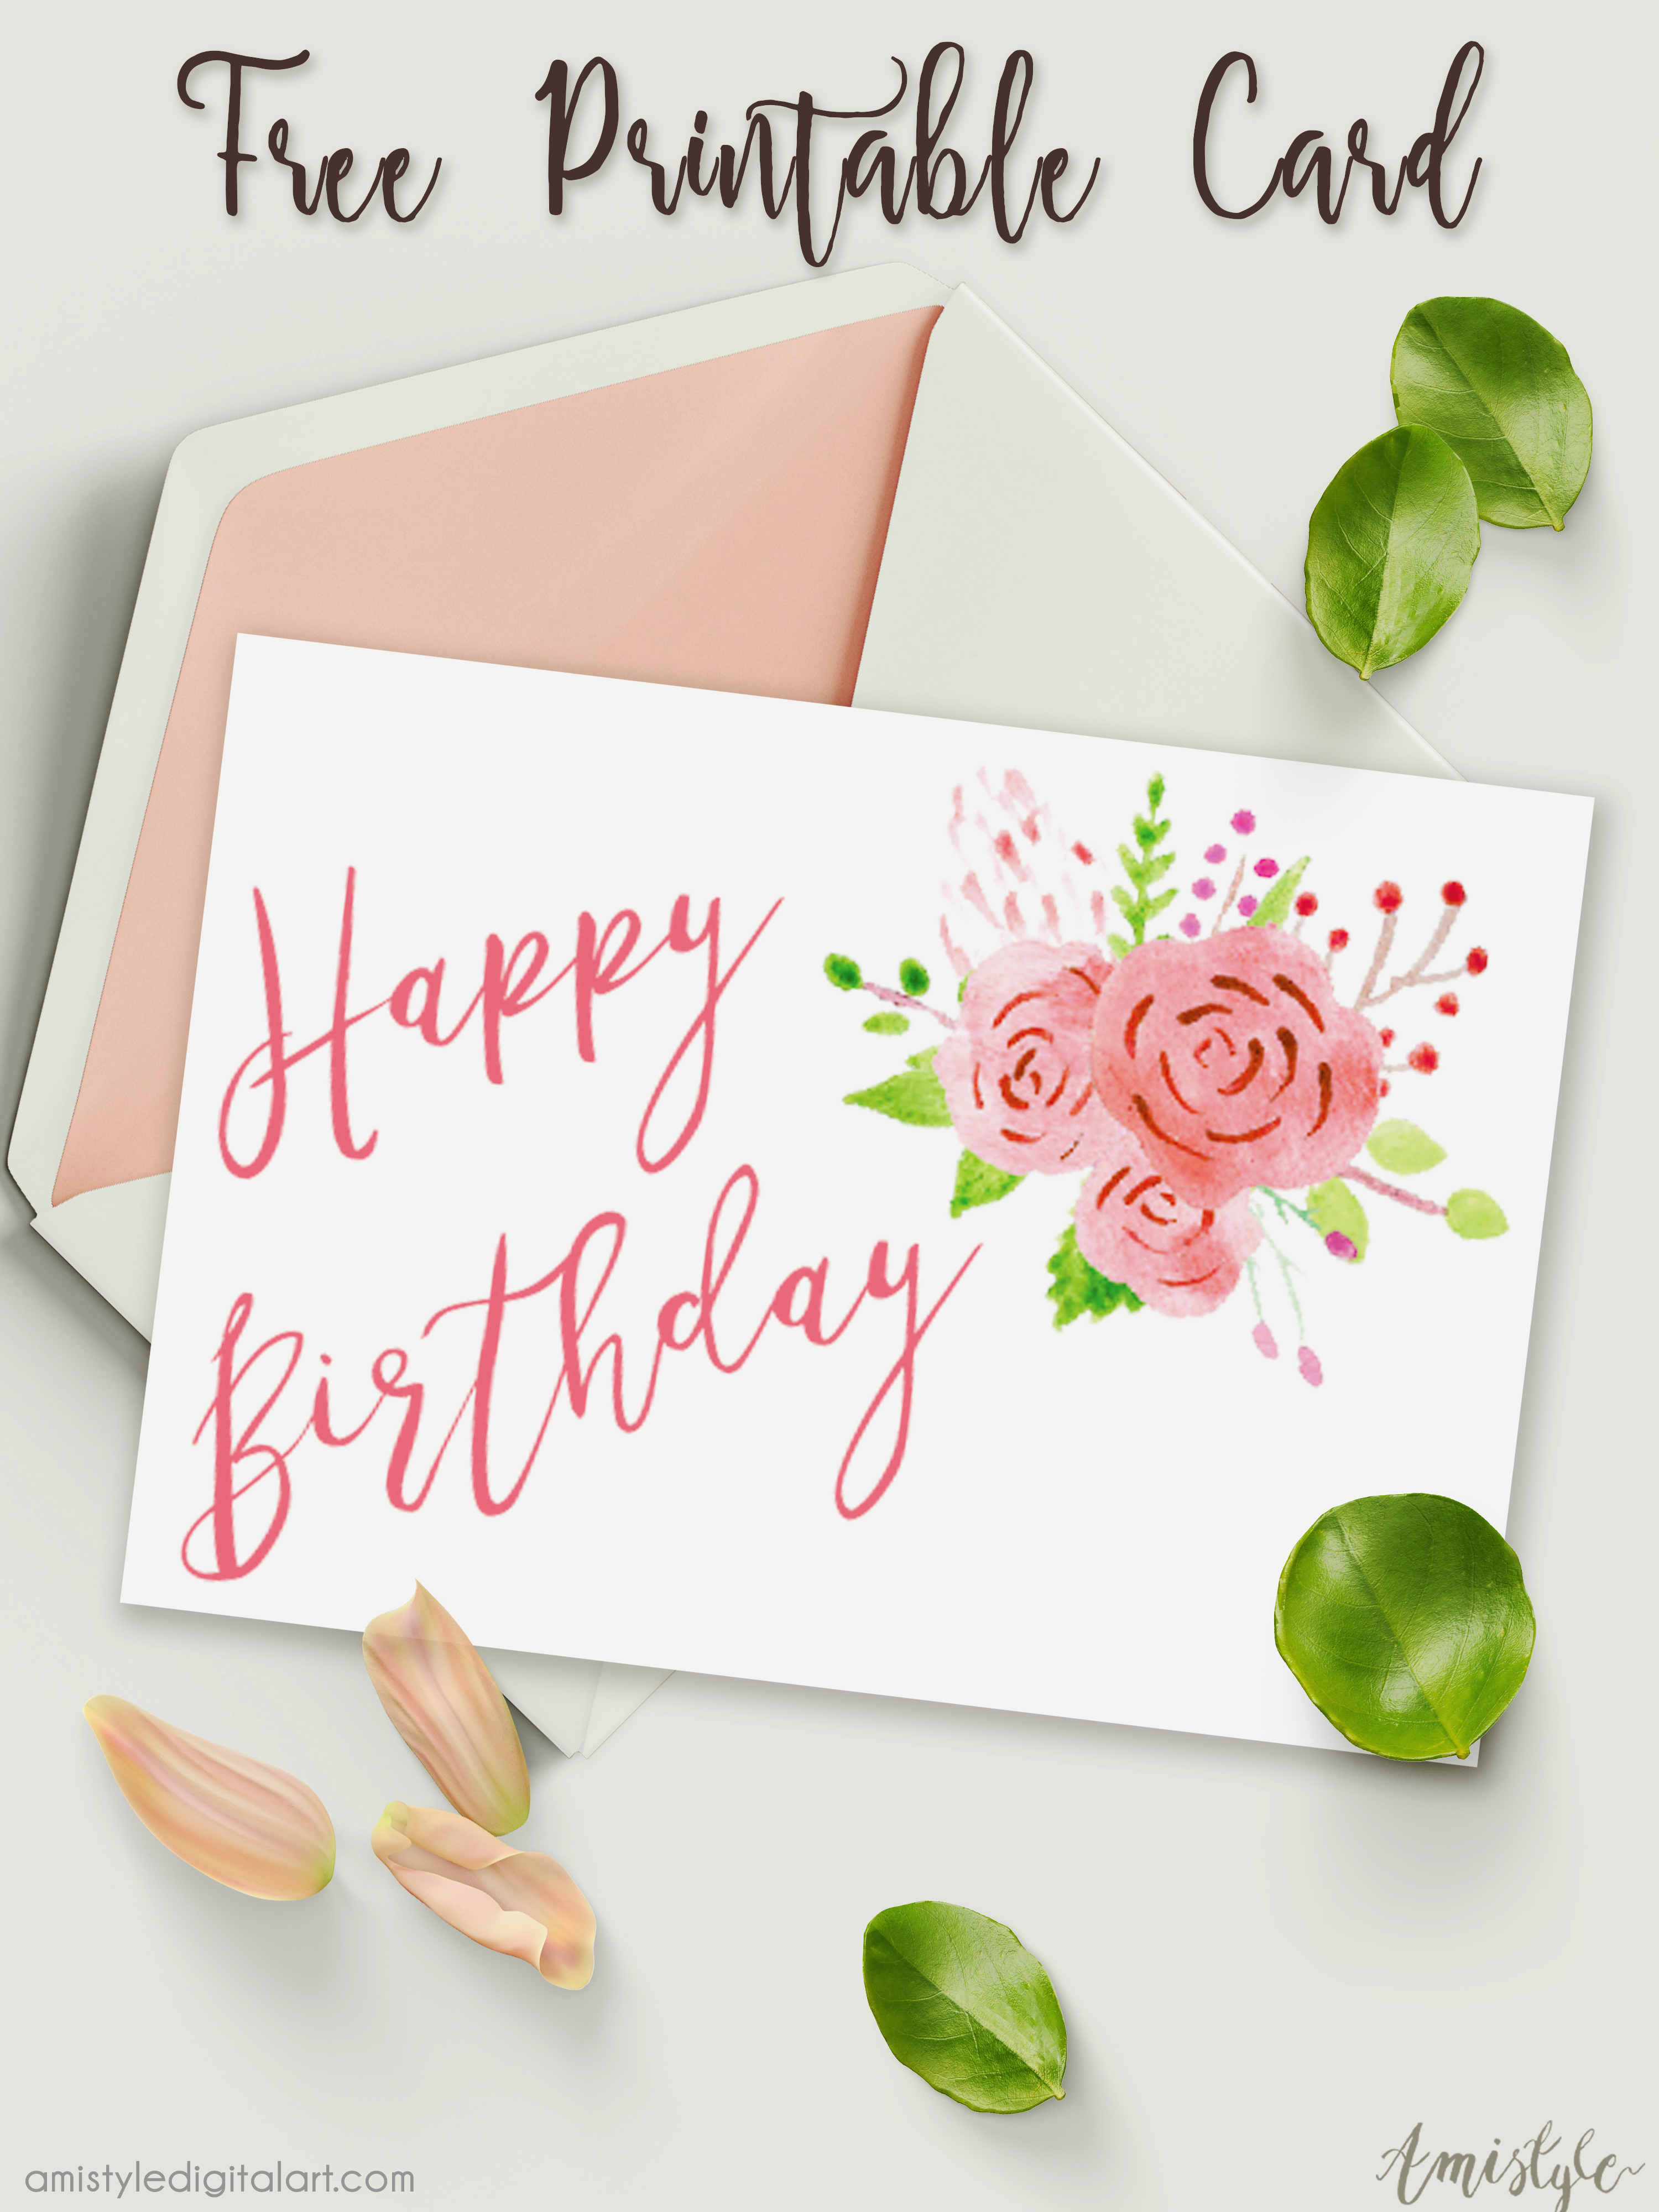 Free Printable Birthday Card With Watercolor Floral Design - Free Printable Birthday Cards For Mom